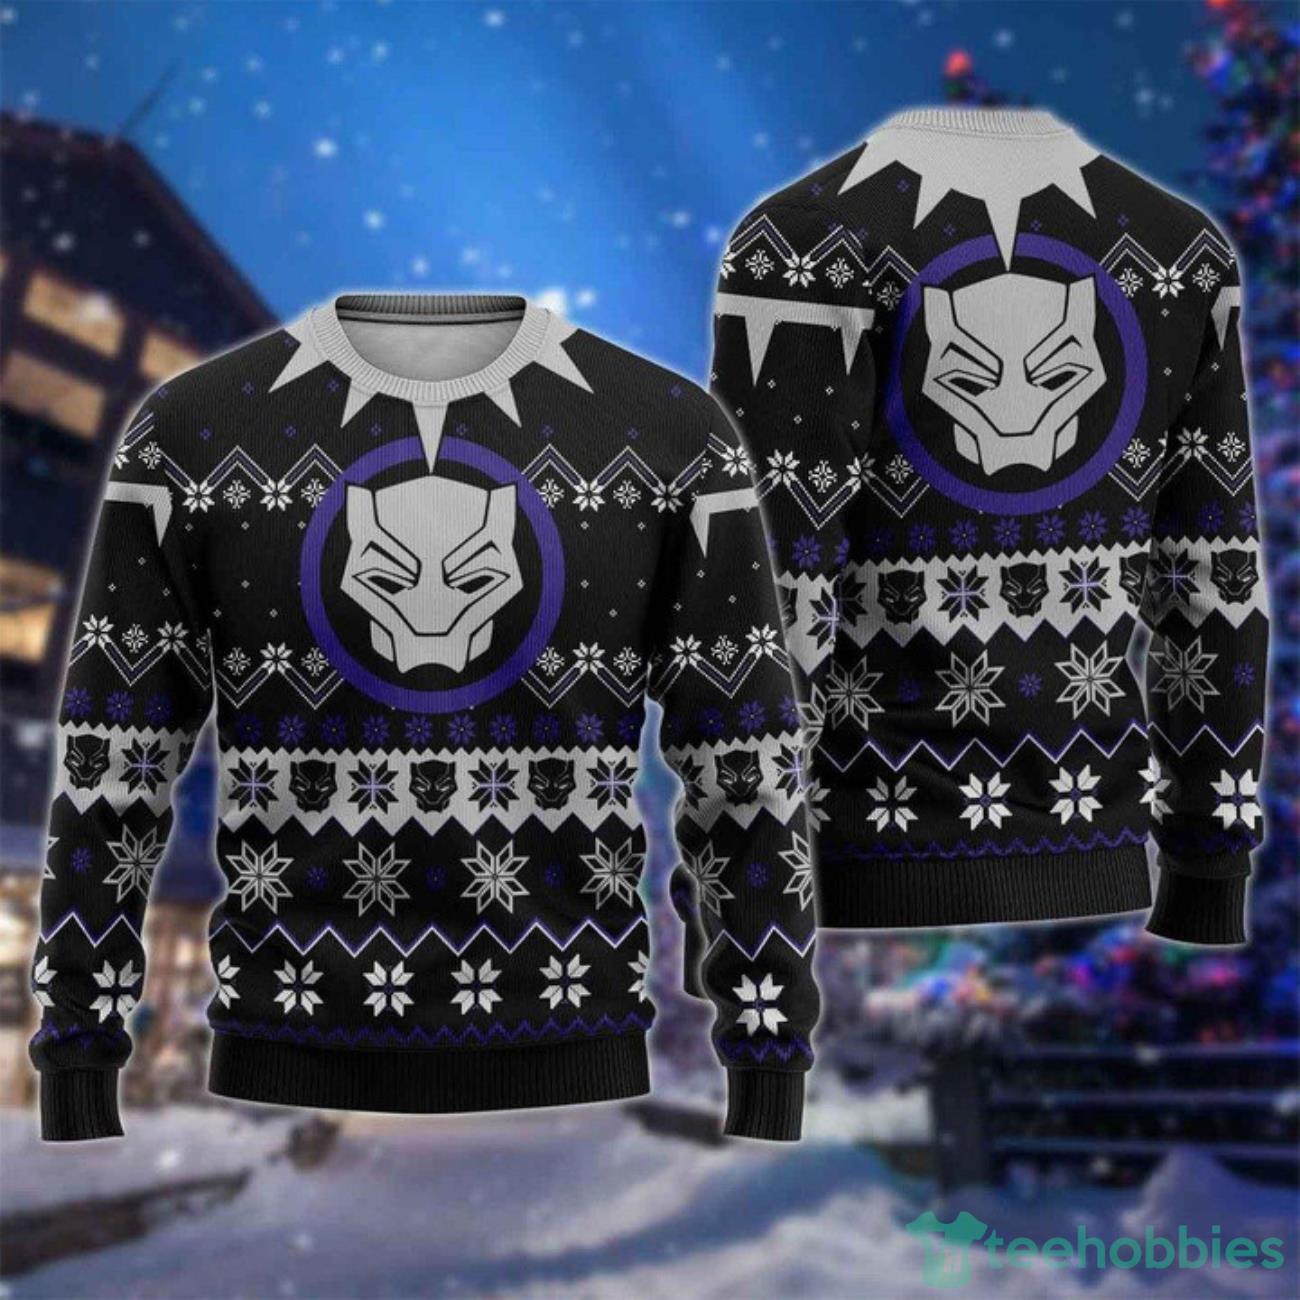 Black Panther Ugly Christmas Sweater For Men Women Product Photo 1